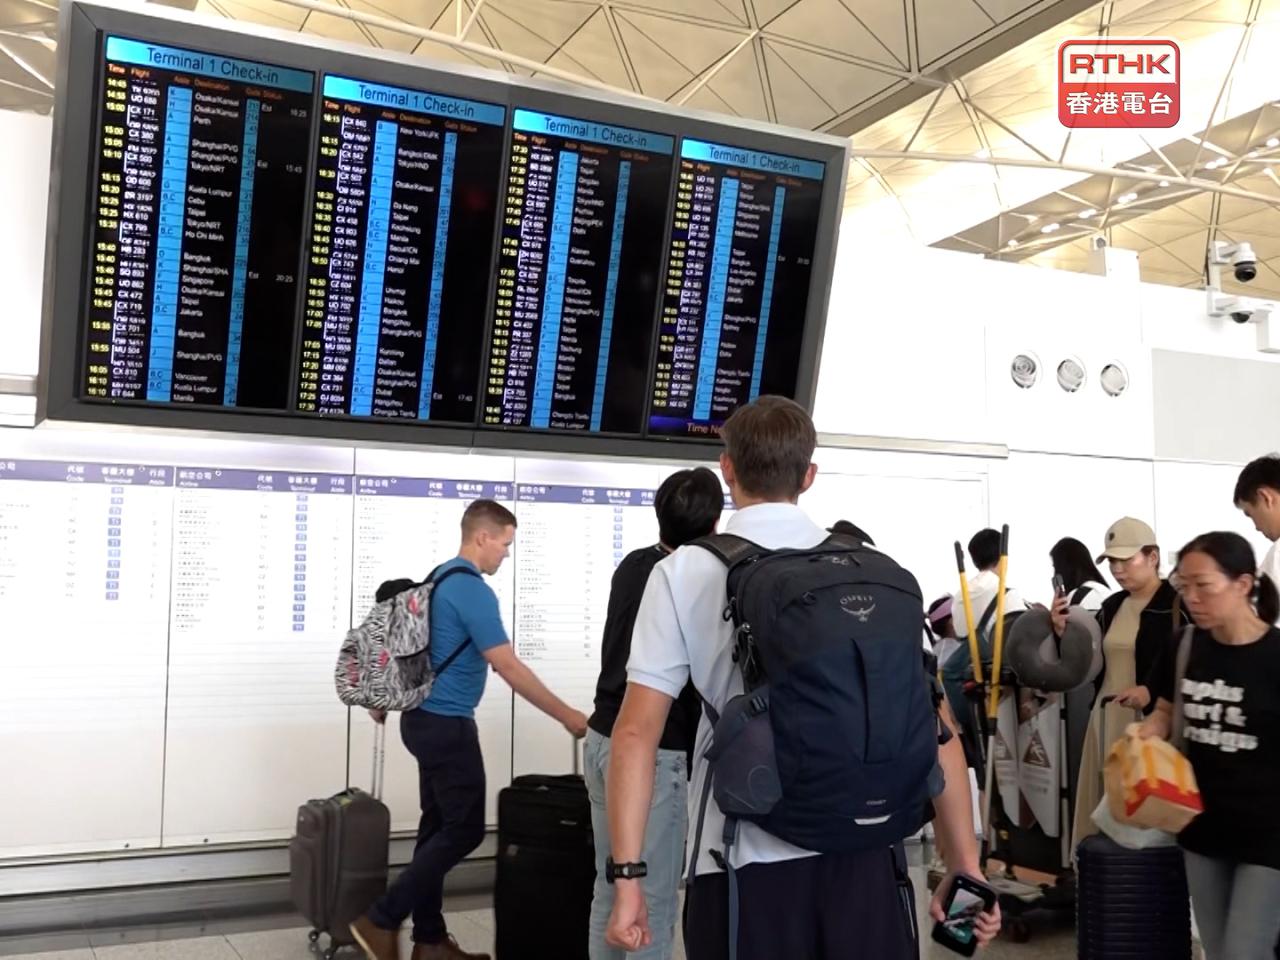 Airport flight display returns to normal after glitch